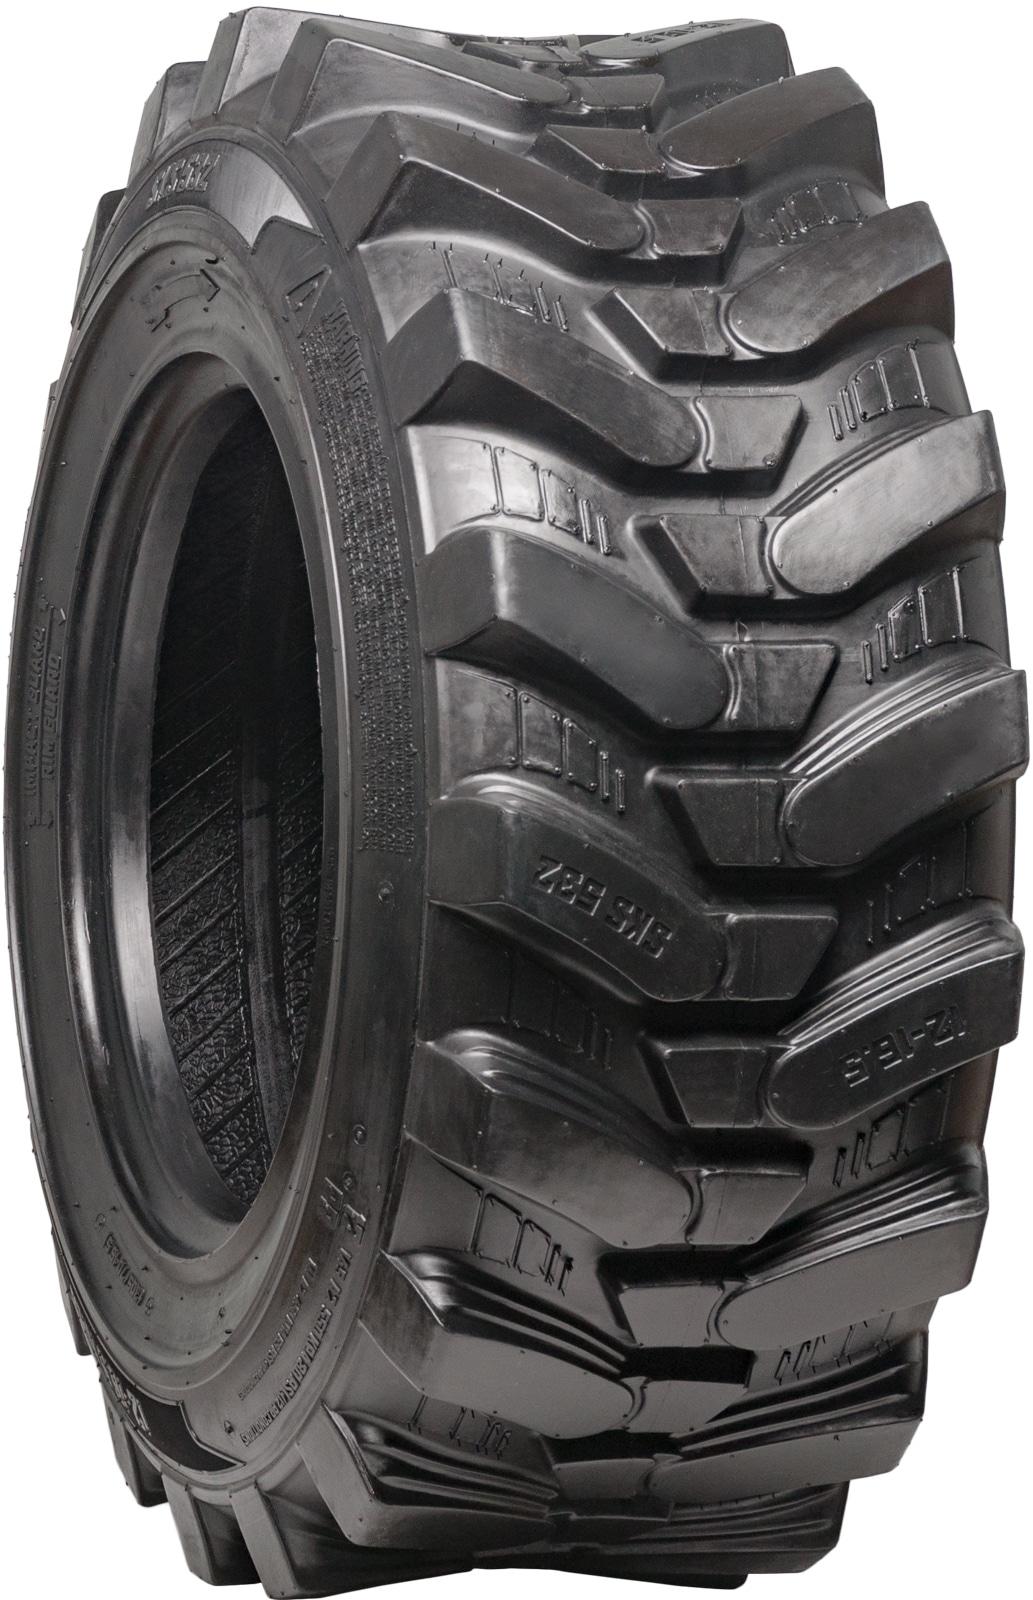 set of 4 12x16.5 camso sks 532 12-ply tire skid steer tires